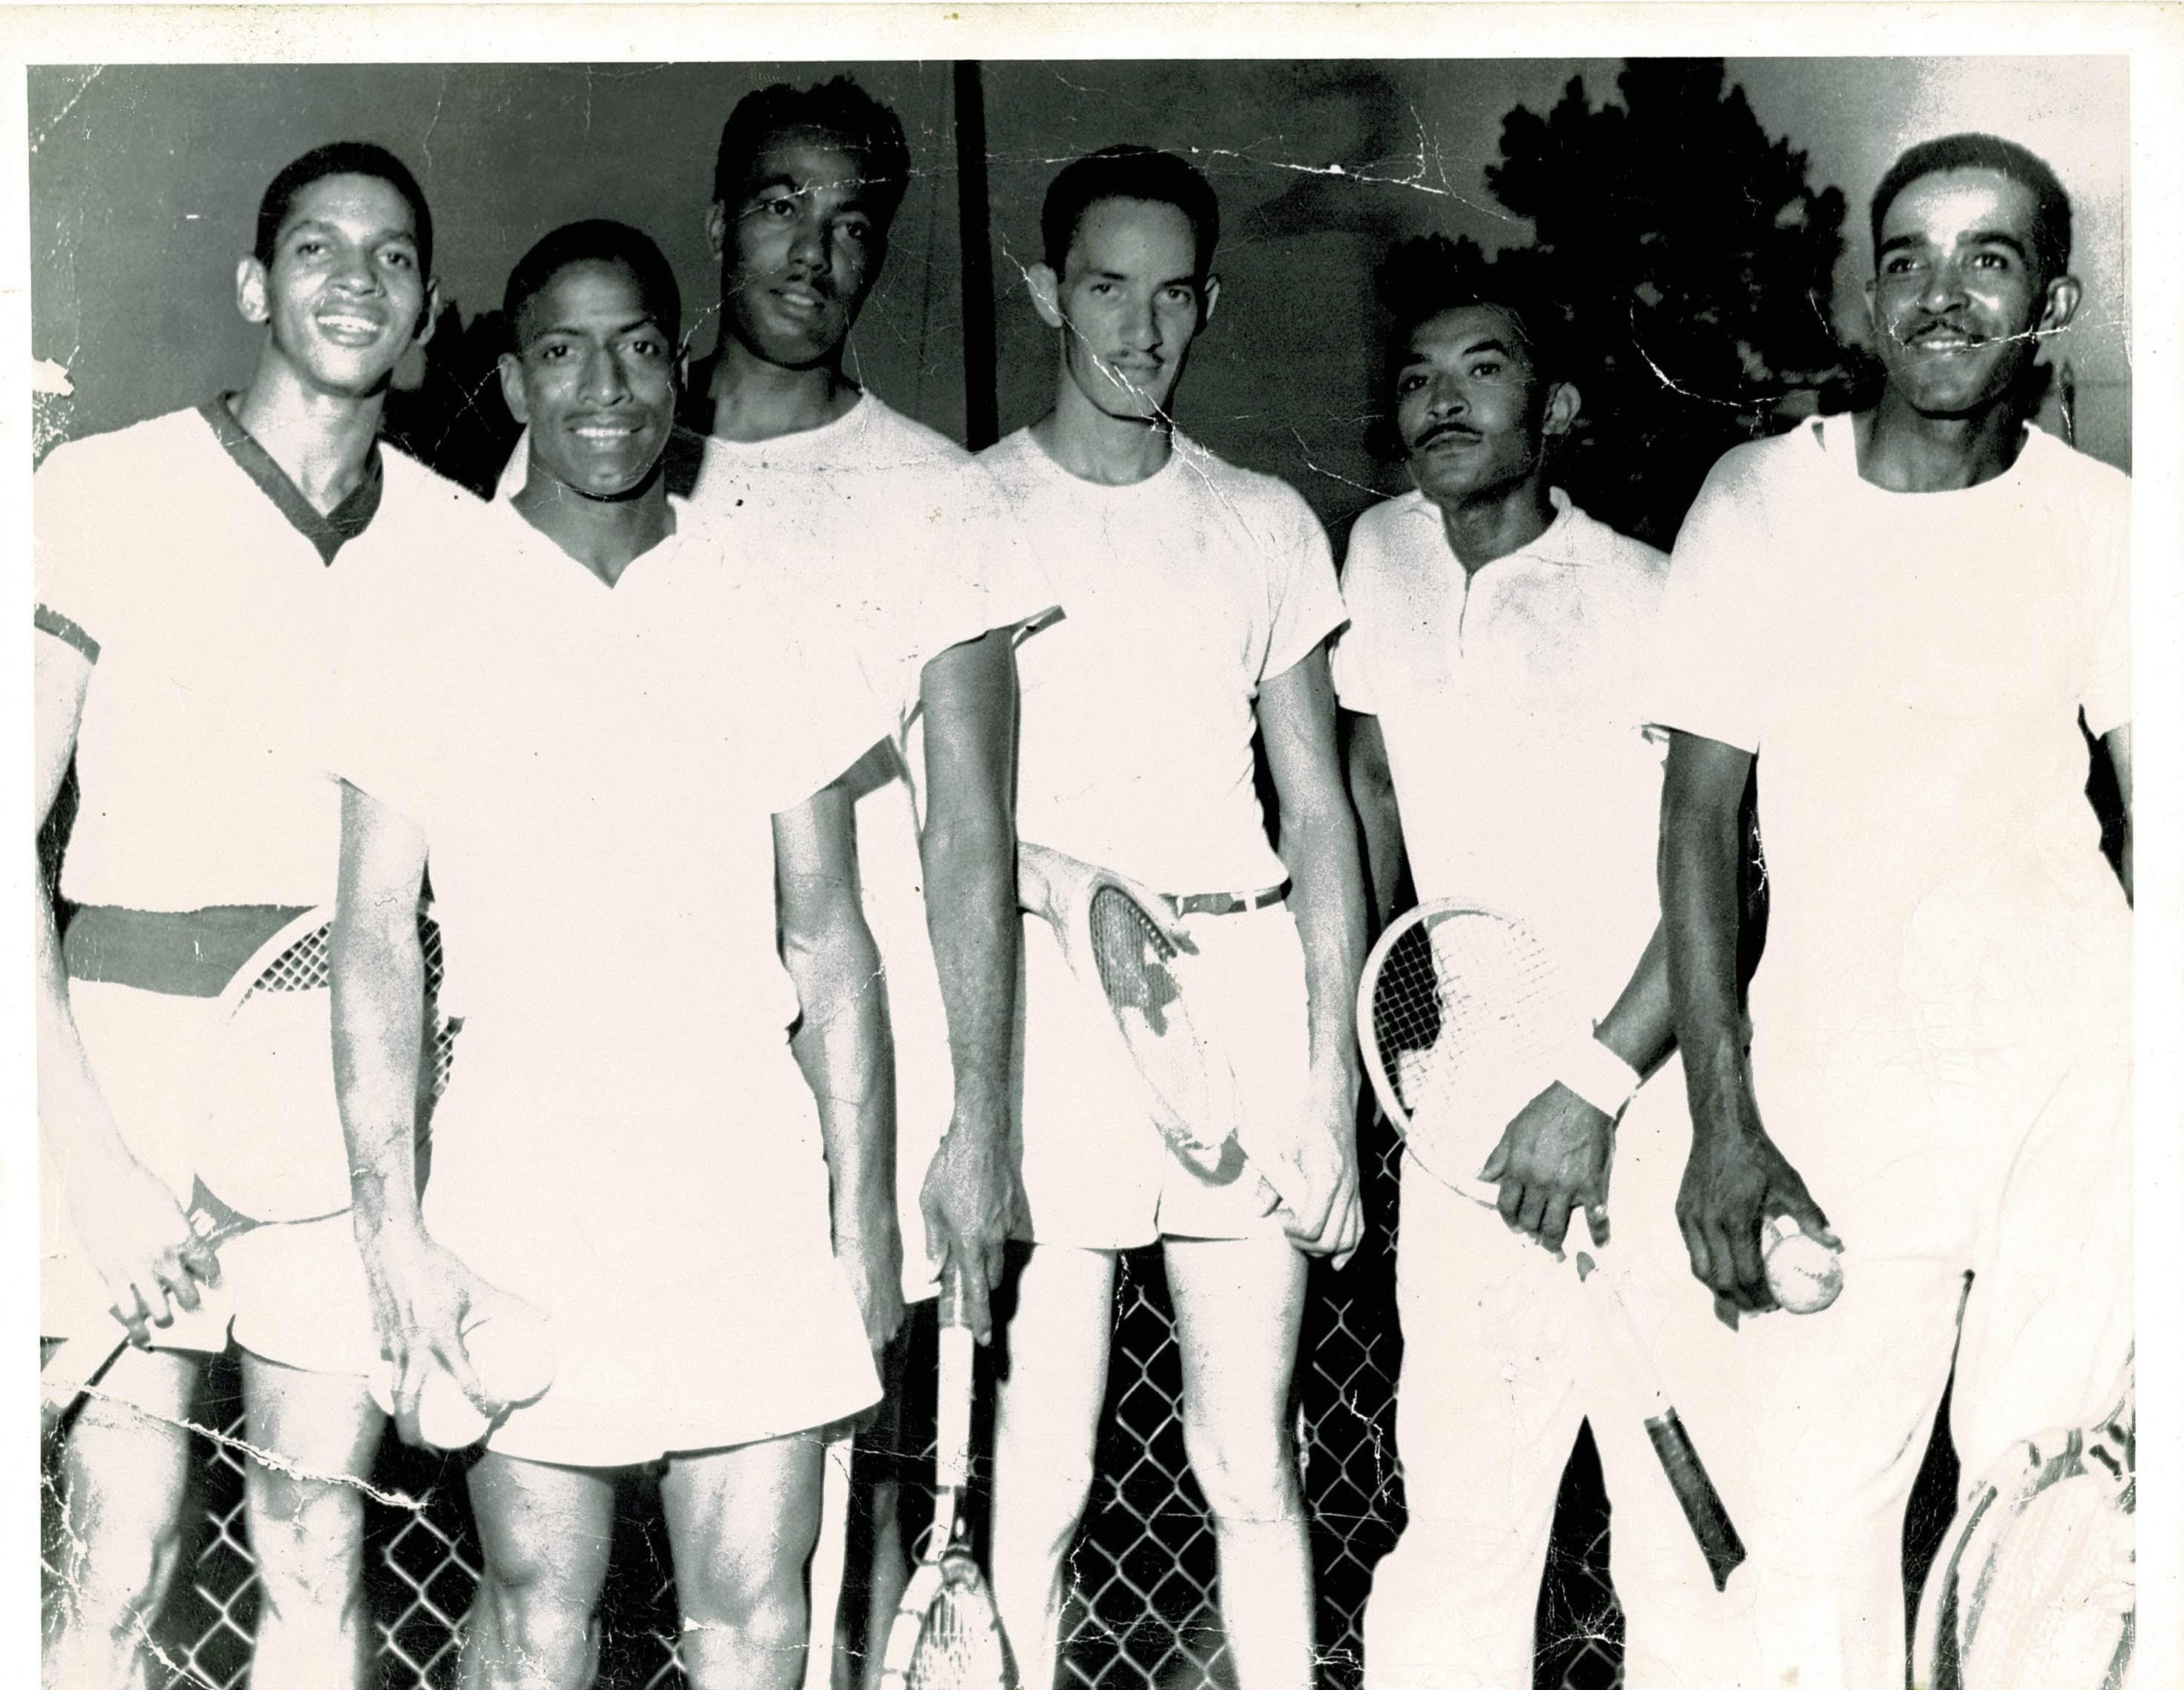 A group of male tennis players pose with their rackets, smiling